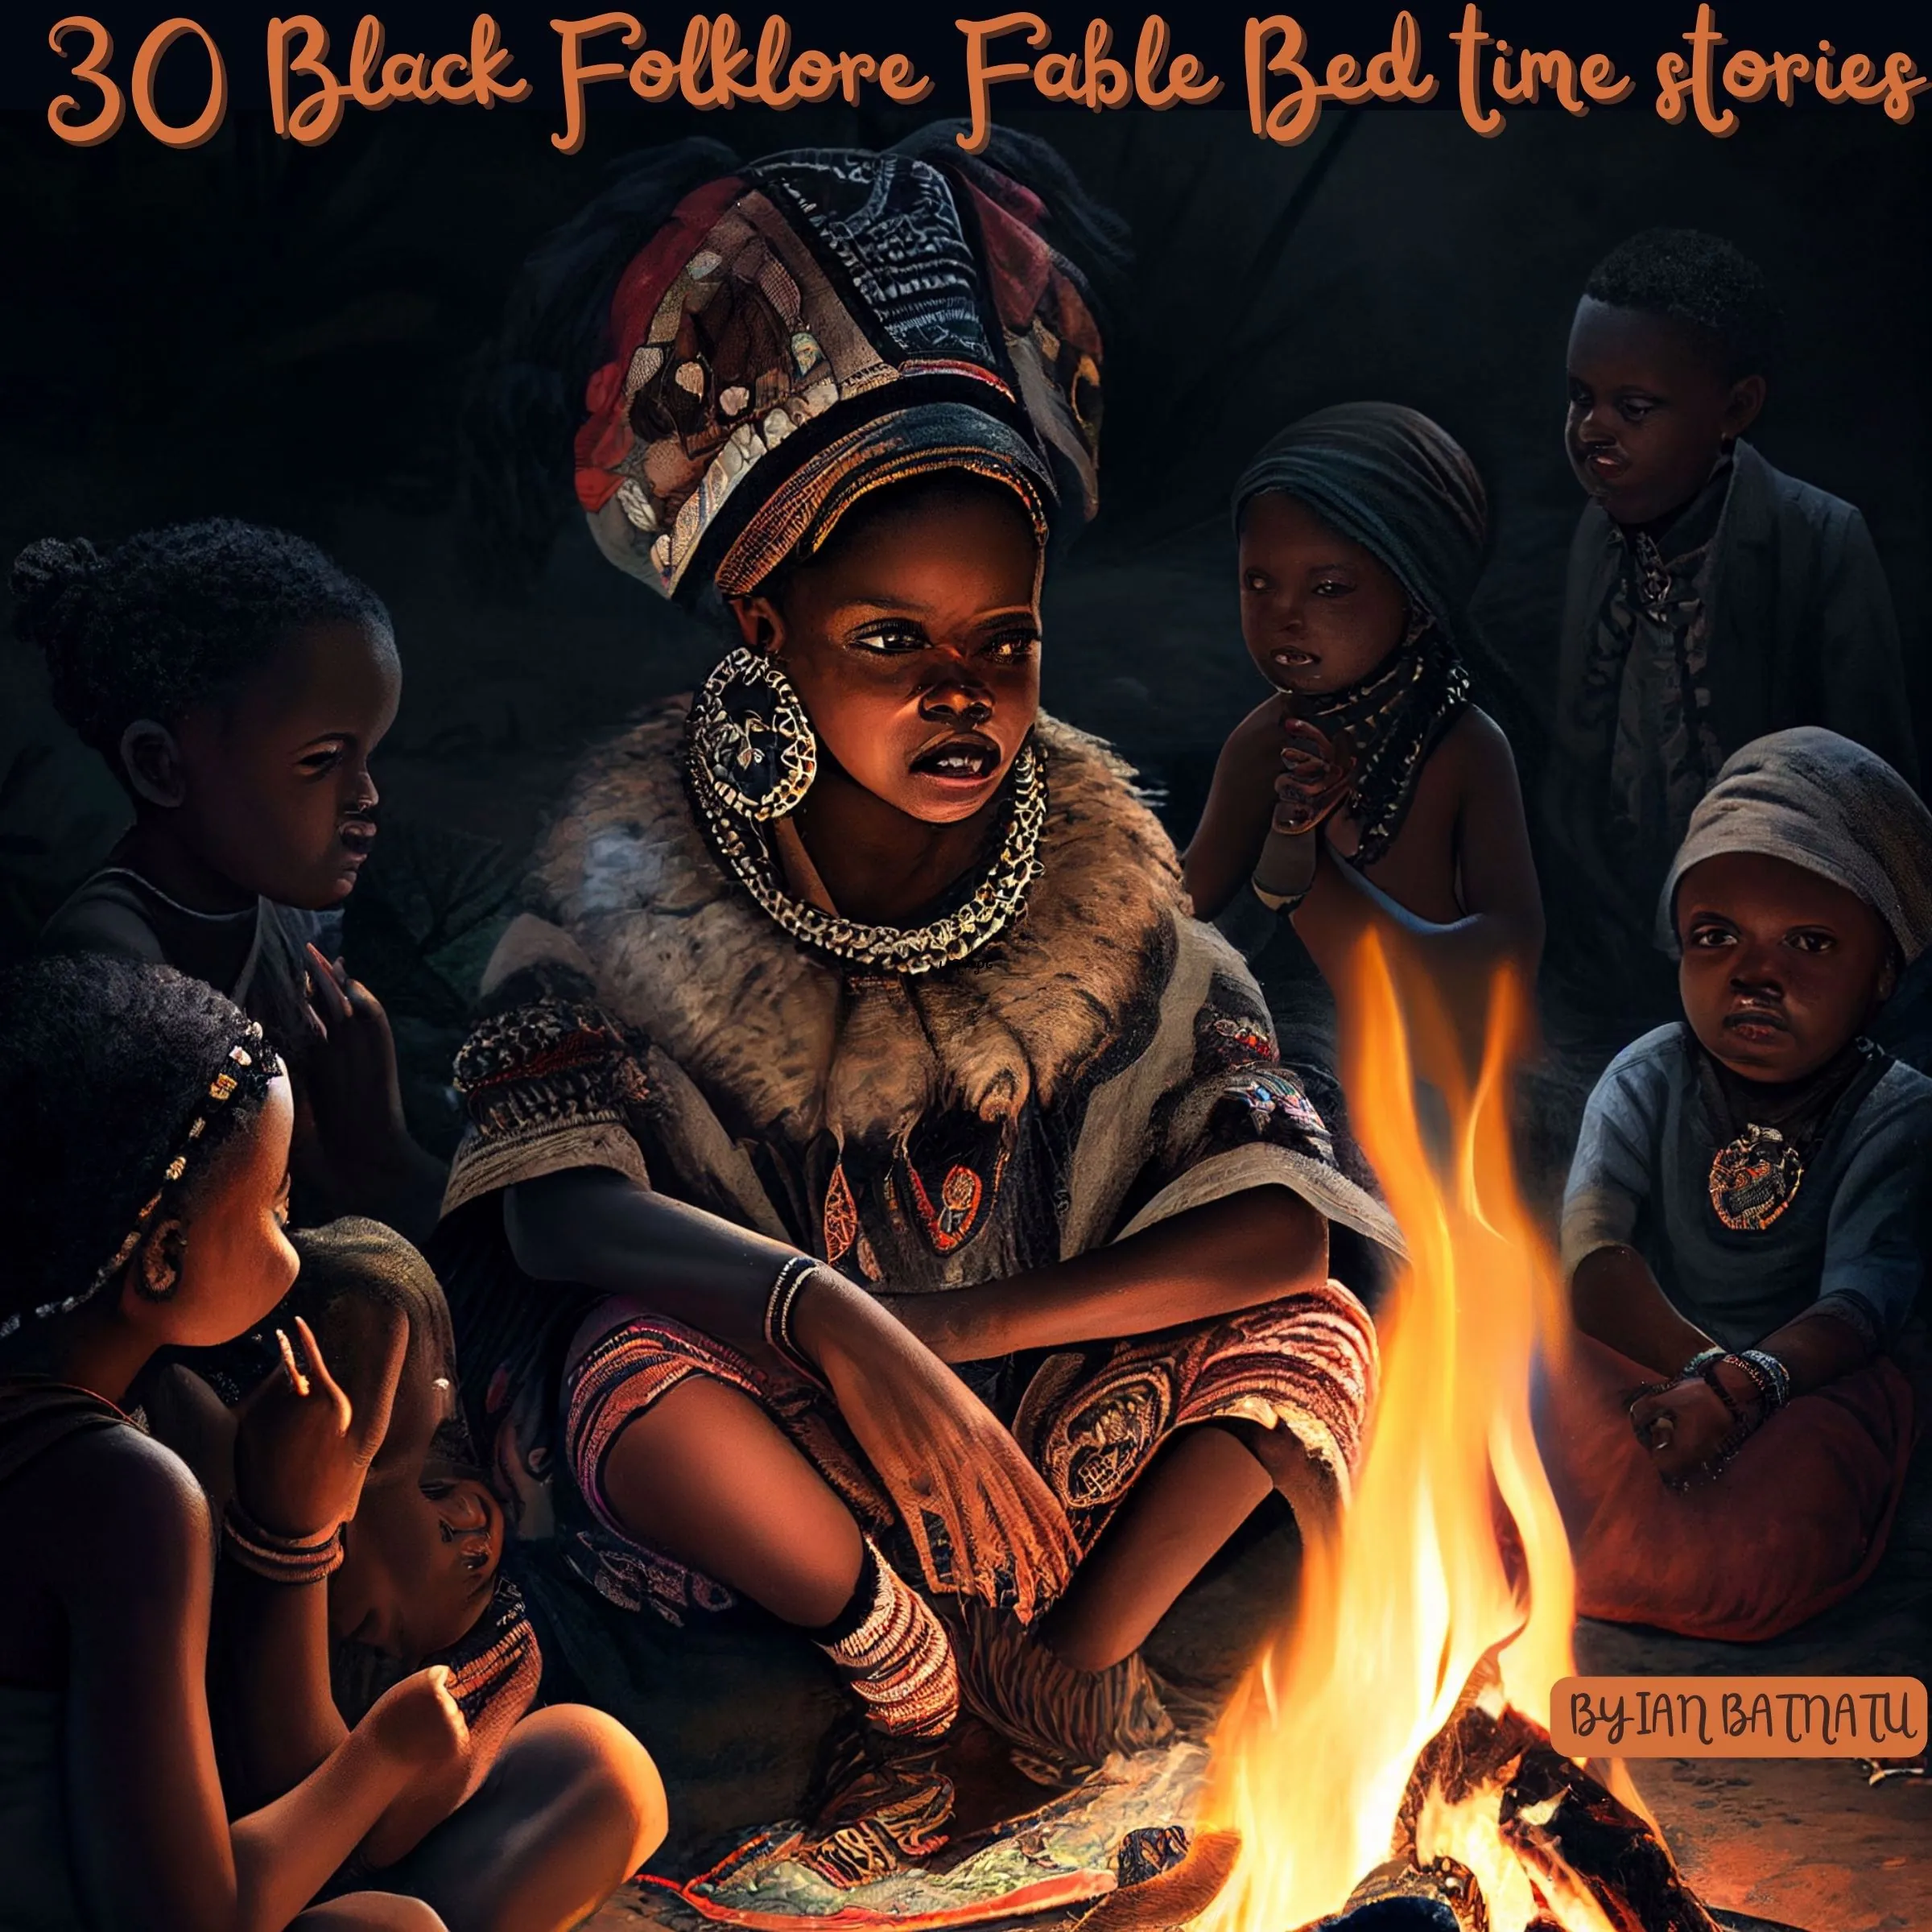 30 Black Folklore Fable Bed time Stories by ian batantu Audiobook